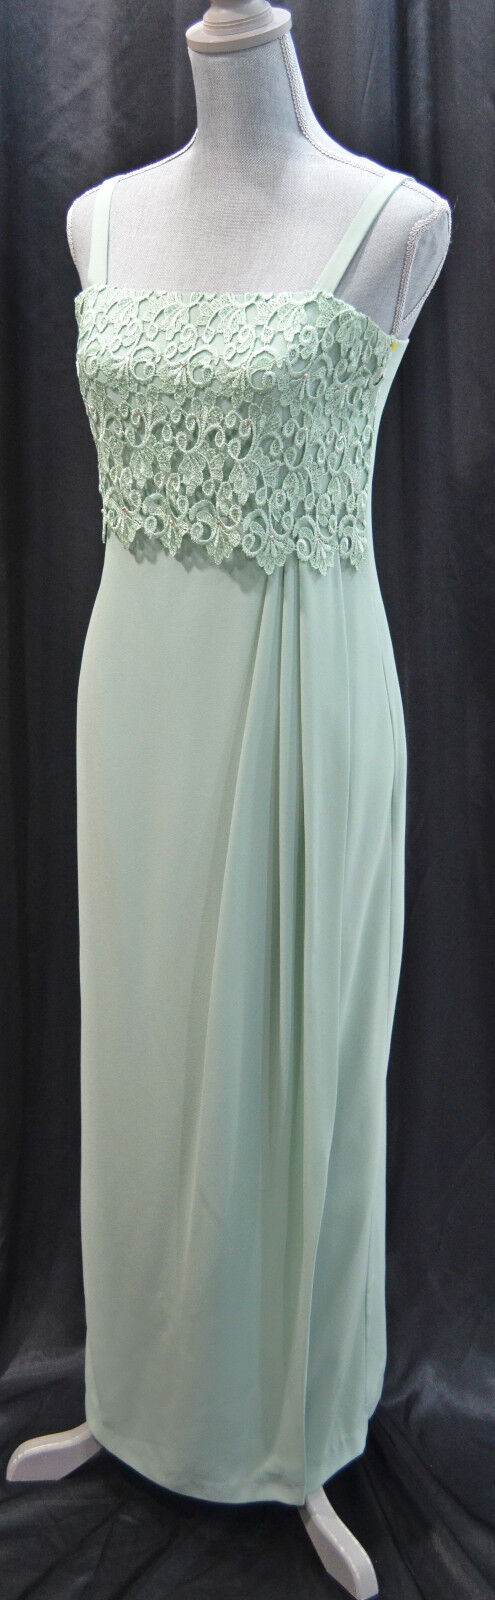 VTG. After Dark Honeydew green lace beaded party … - image 1